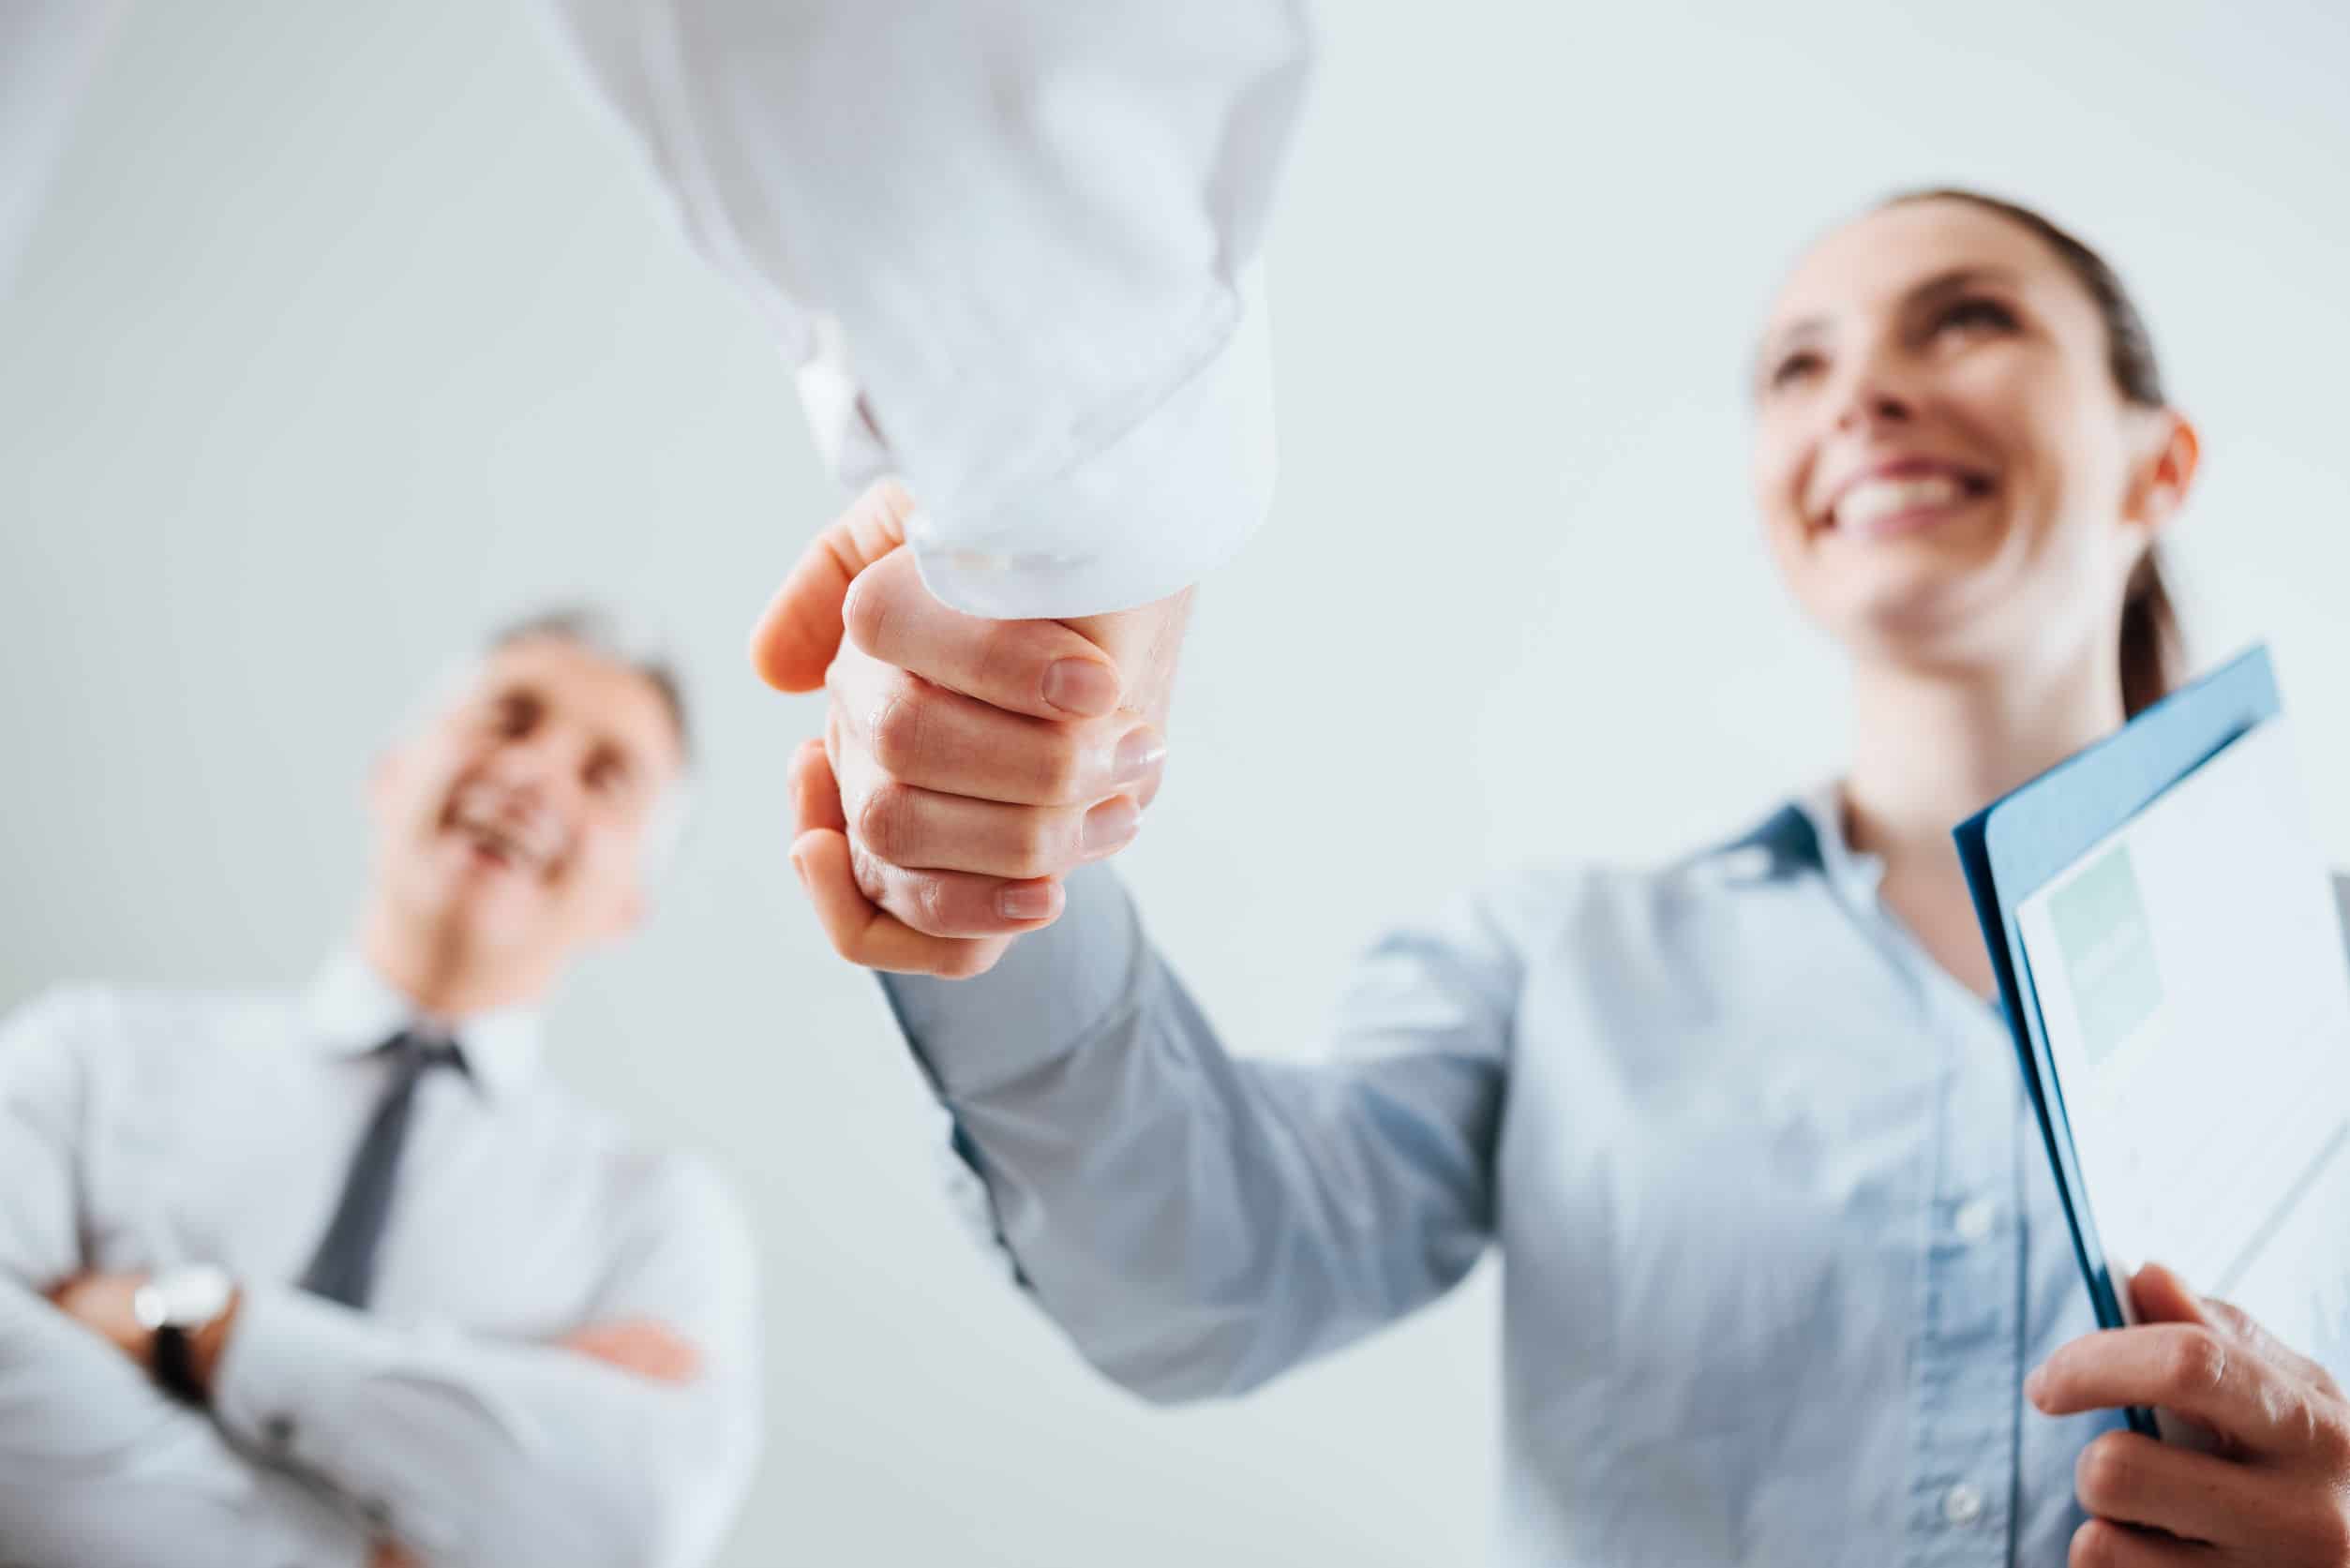 close-up of a woman and man shaking hands while a coworker looks on